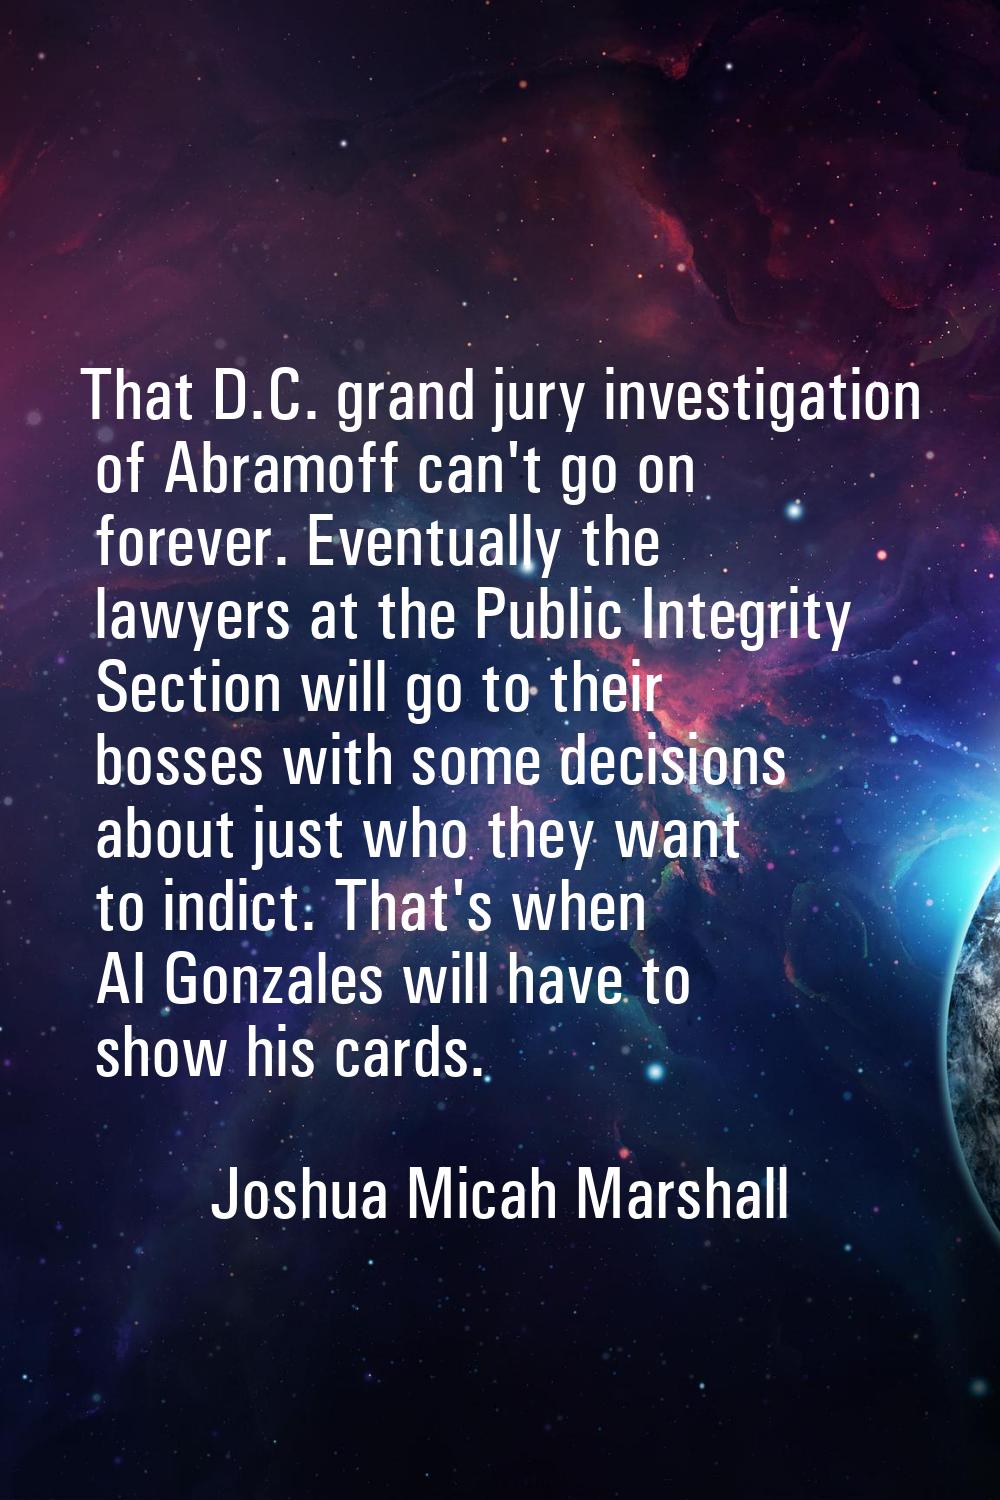 That D.C. grand jury investigation of Abramoff can't go on forever. Eventually the lawyers at the P